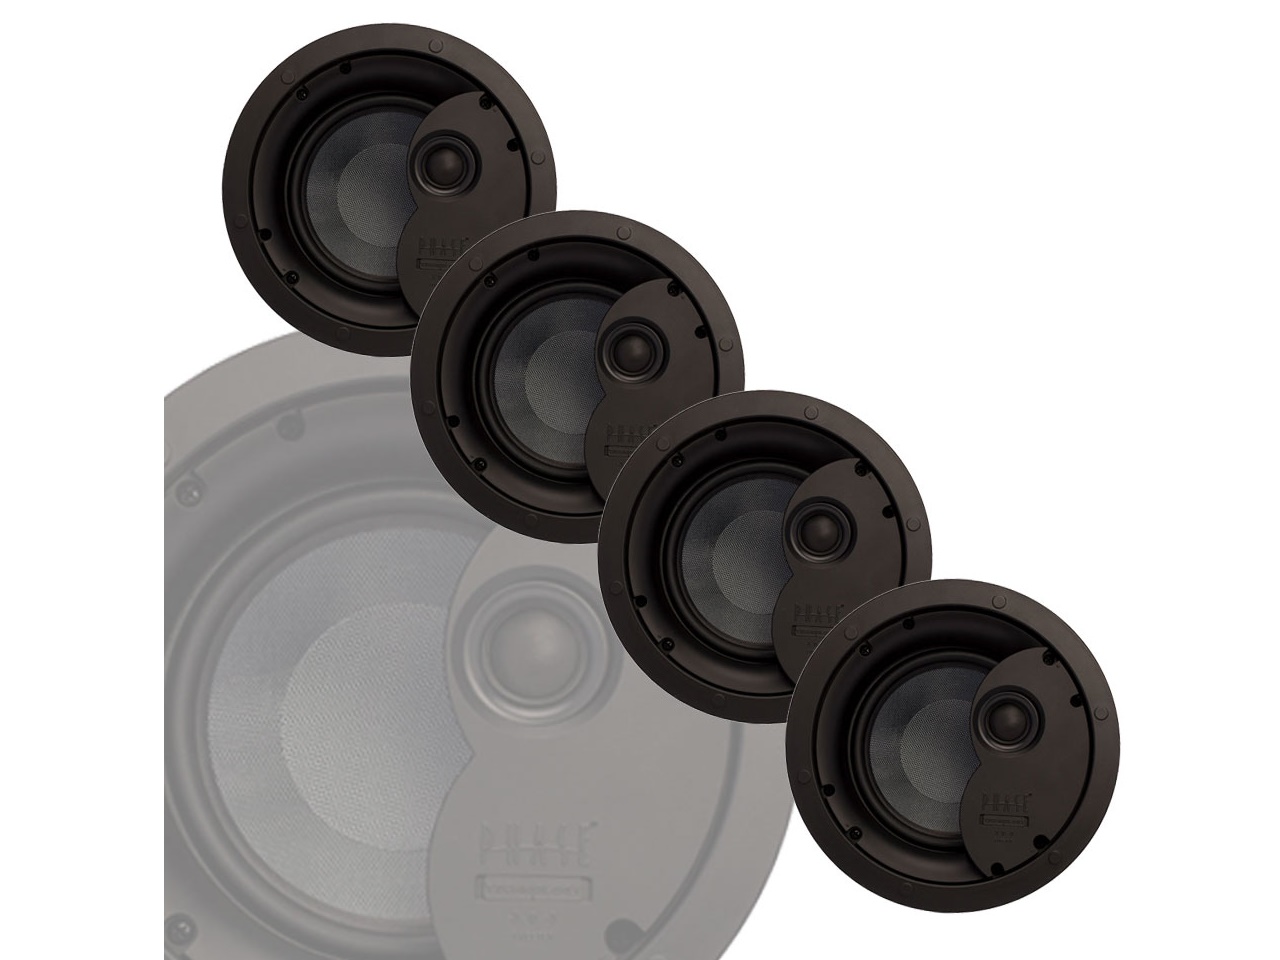 CI6.1XMP 6.5 inch 2-way Ceiling Speaker Master Pack (4 Units) by Phase Technology